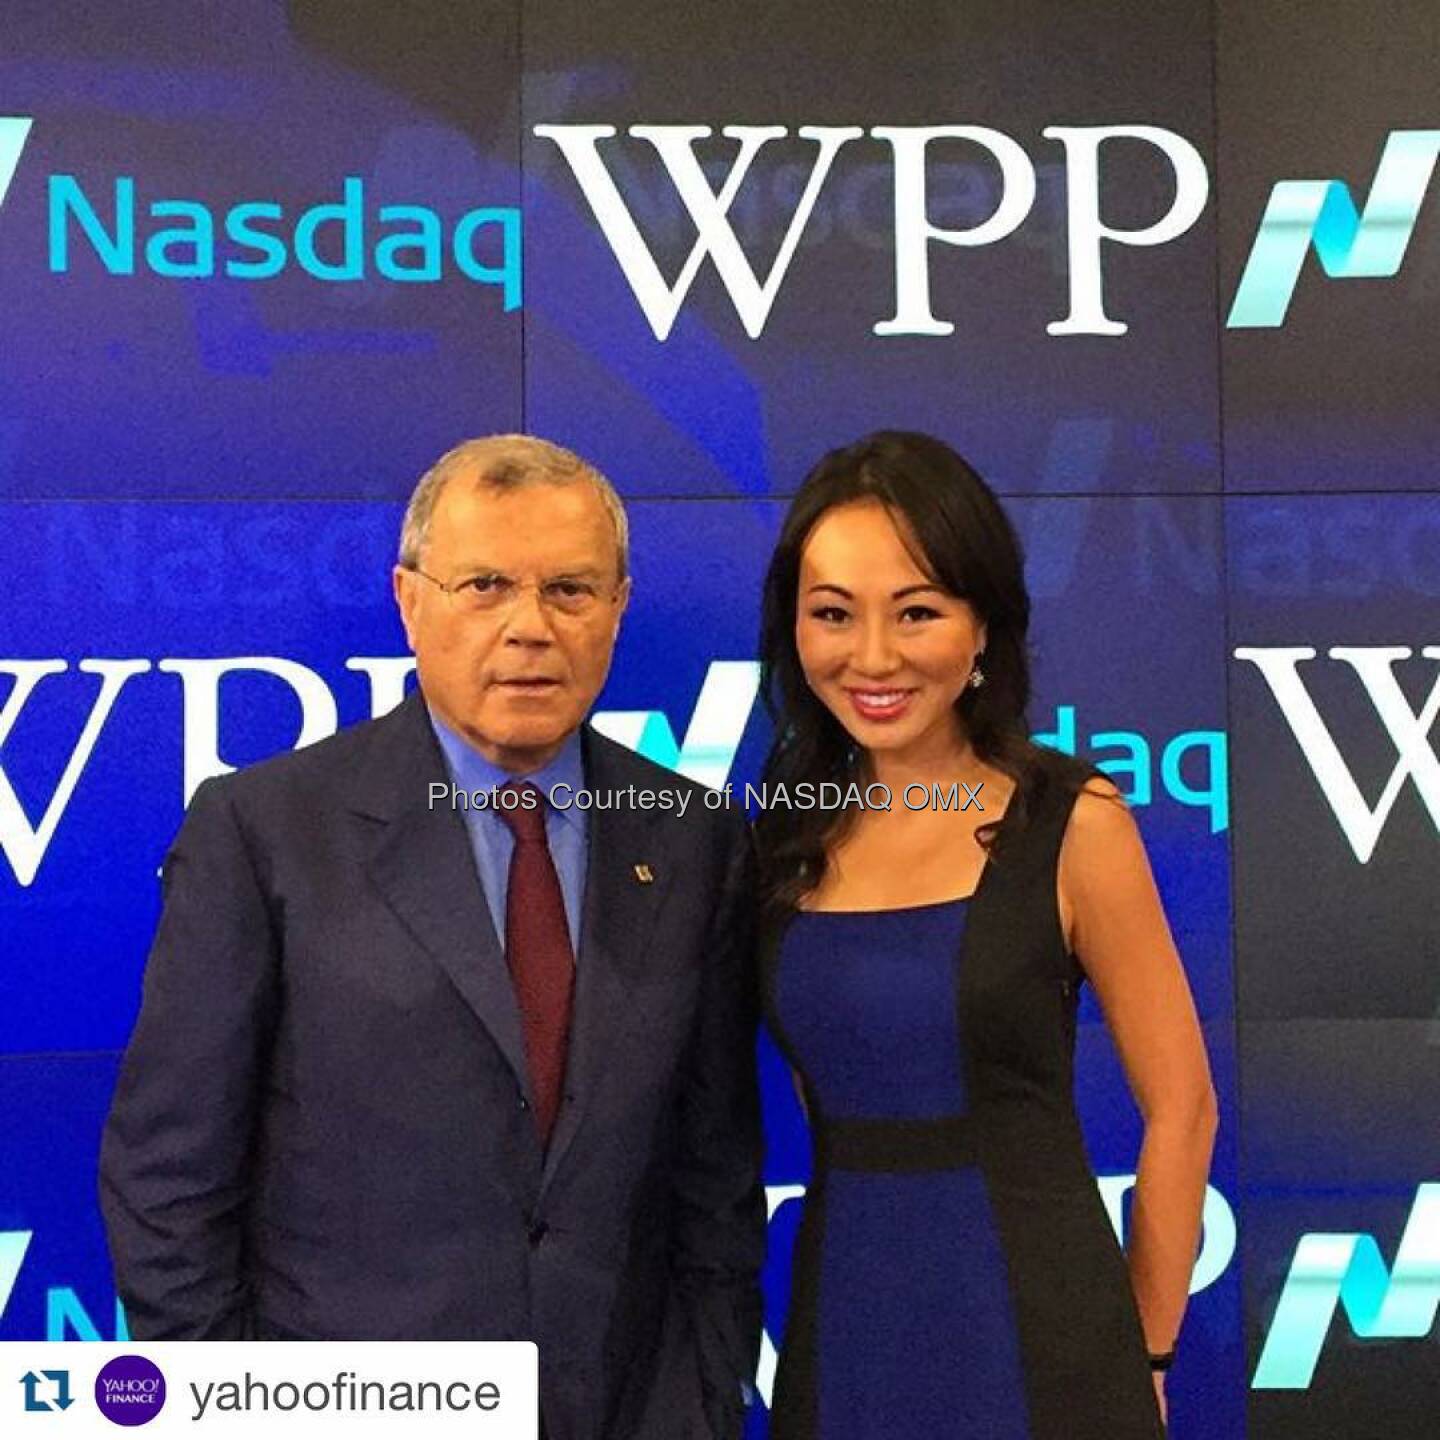 #Repost @yahoofinance: YF's Sue Lee interviewed Sir Martin Sorrell, CEO of WPP (the world's largest communications firm) after he rang the @nasdaq closing bell today. #YFbehindthescenes #closingbell #nasdaq  #behindthescenes  Source: http://facebook.com/NASDAQ